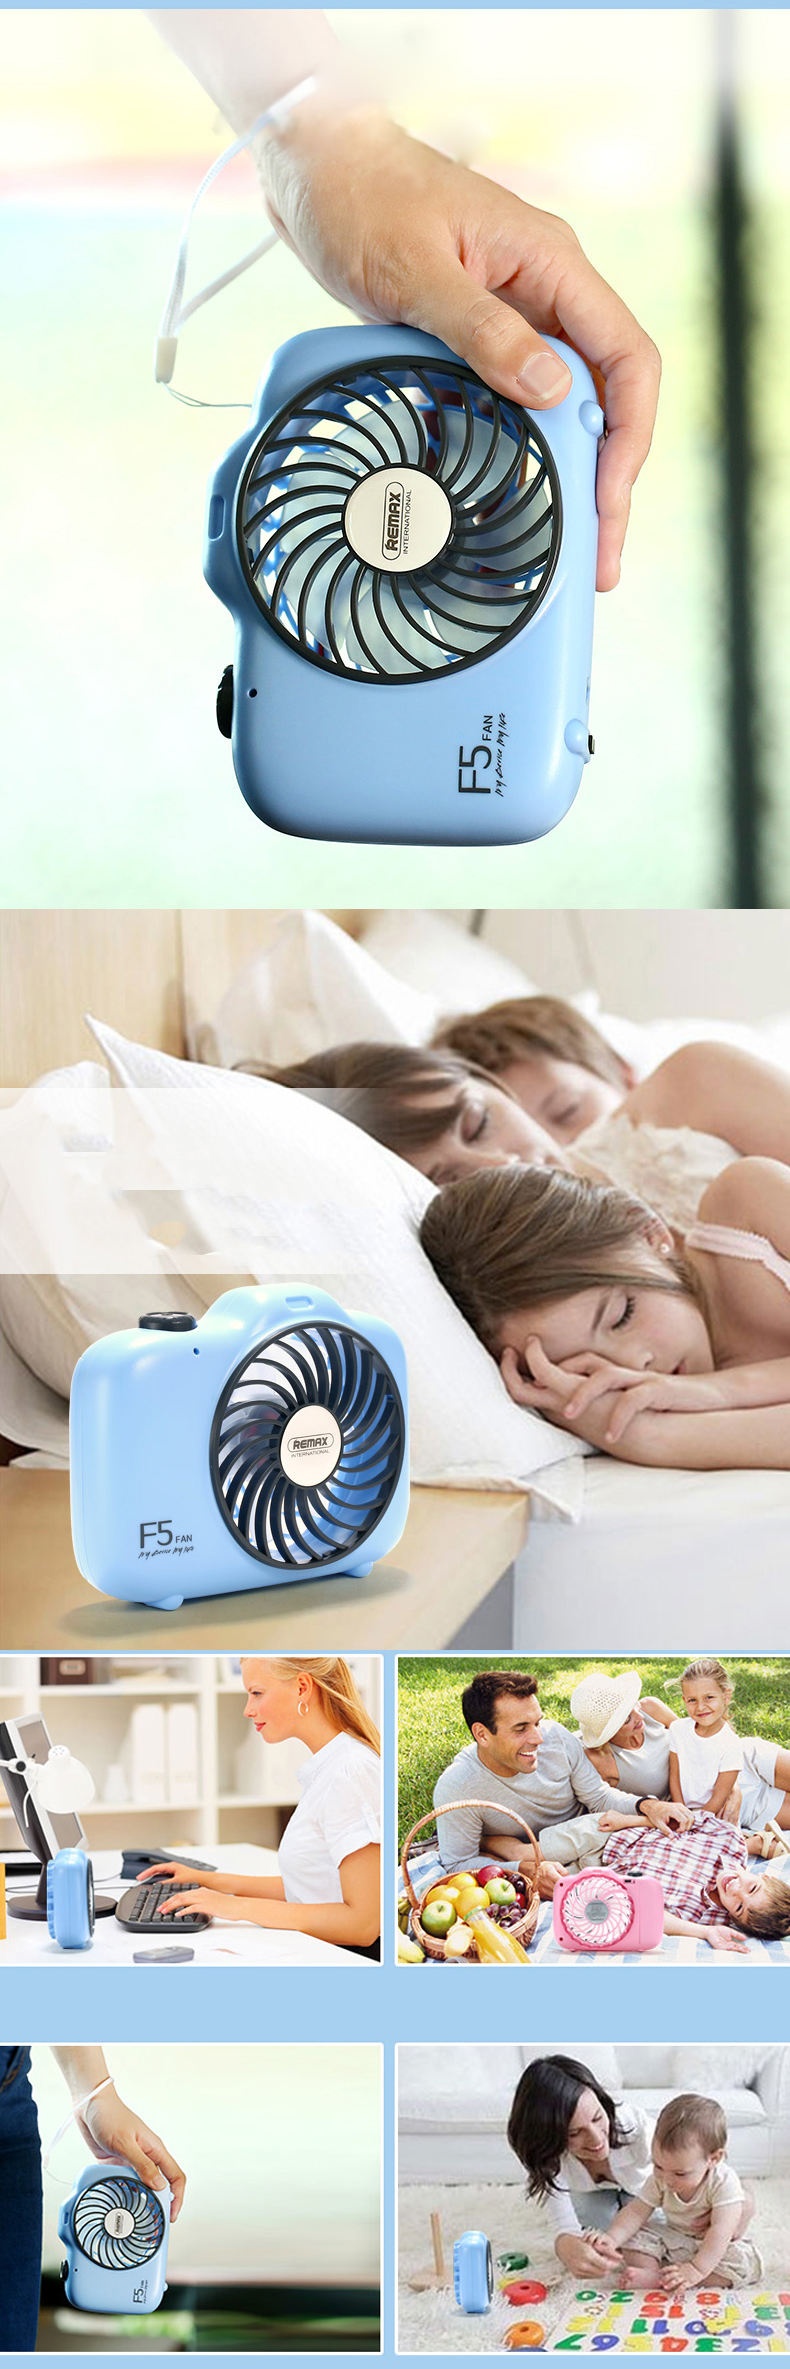 Remax-Summer-Rechargeable-Hand-held-Camera-Shape-Cooling-Fan-Portable-USB-Charge-Ventilador-1166880